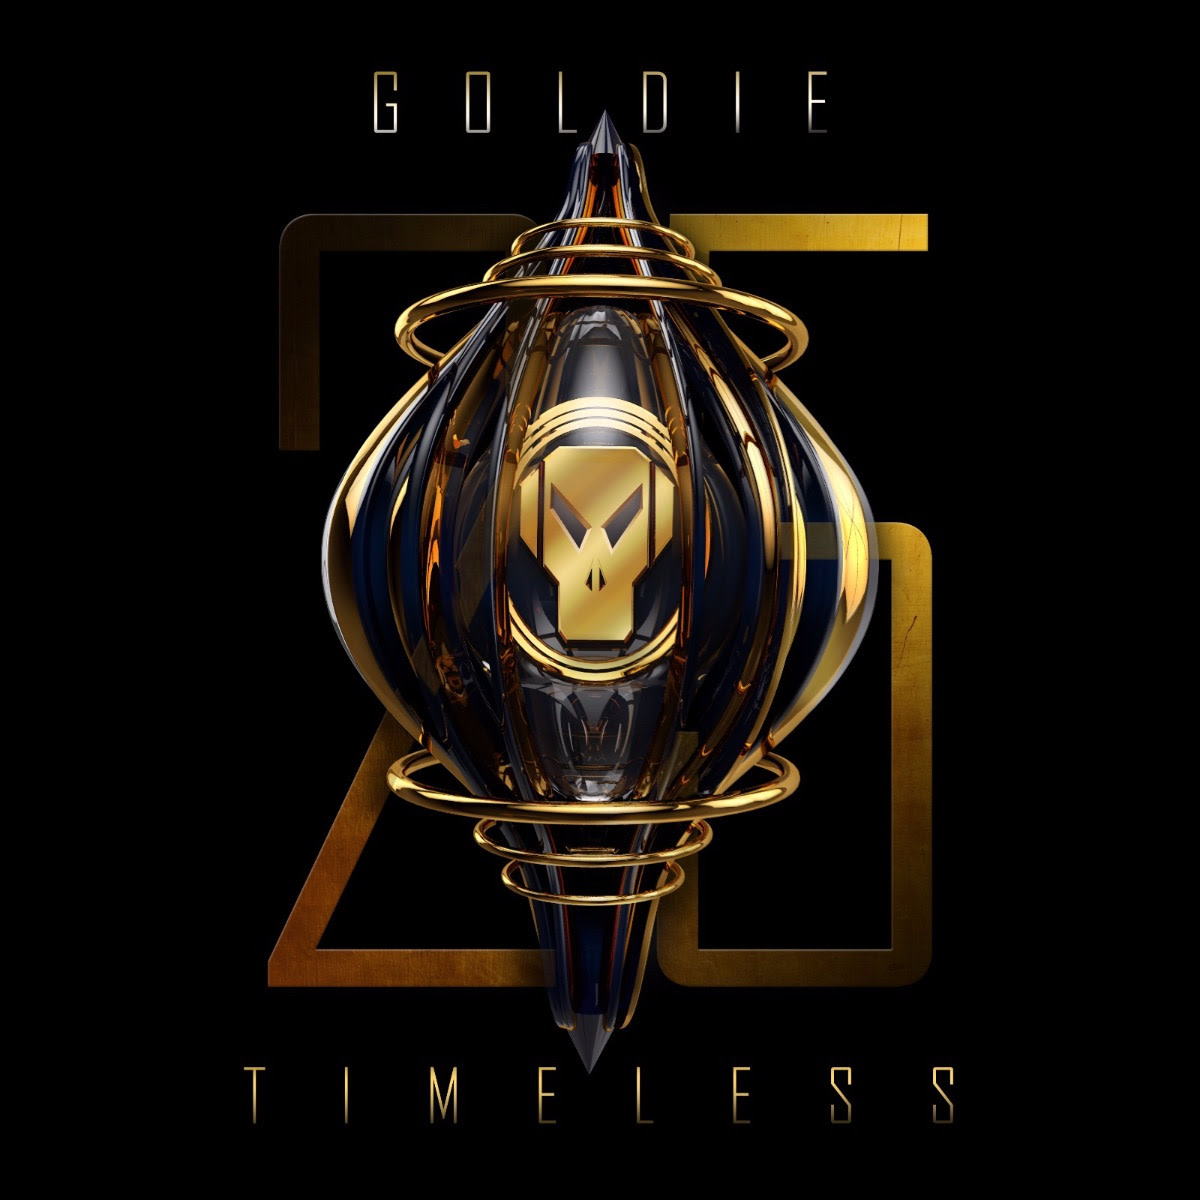 Goldie Timeless